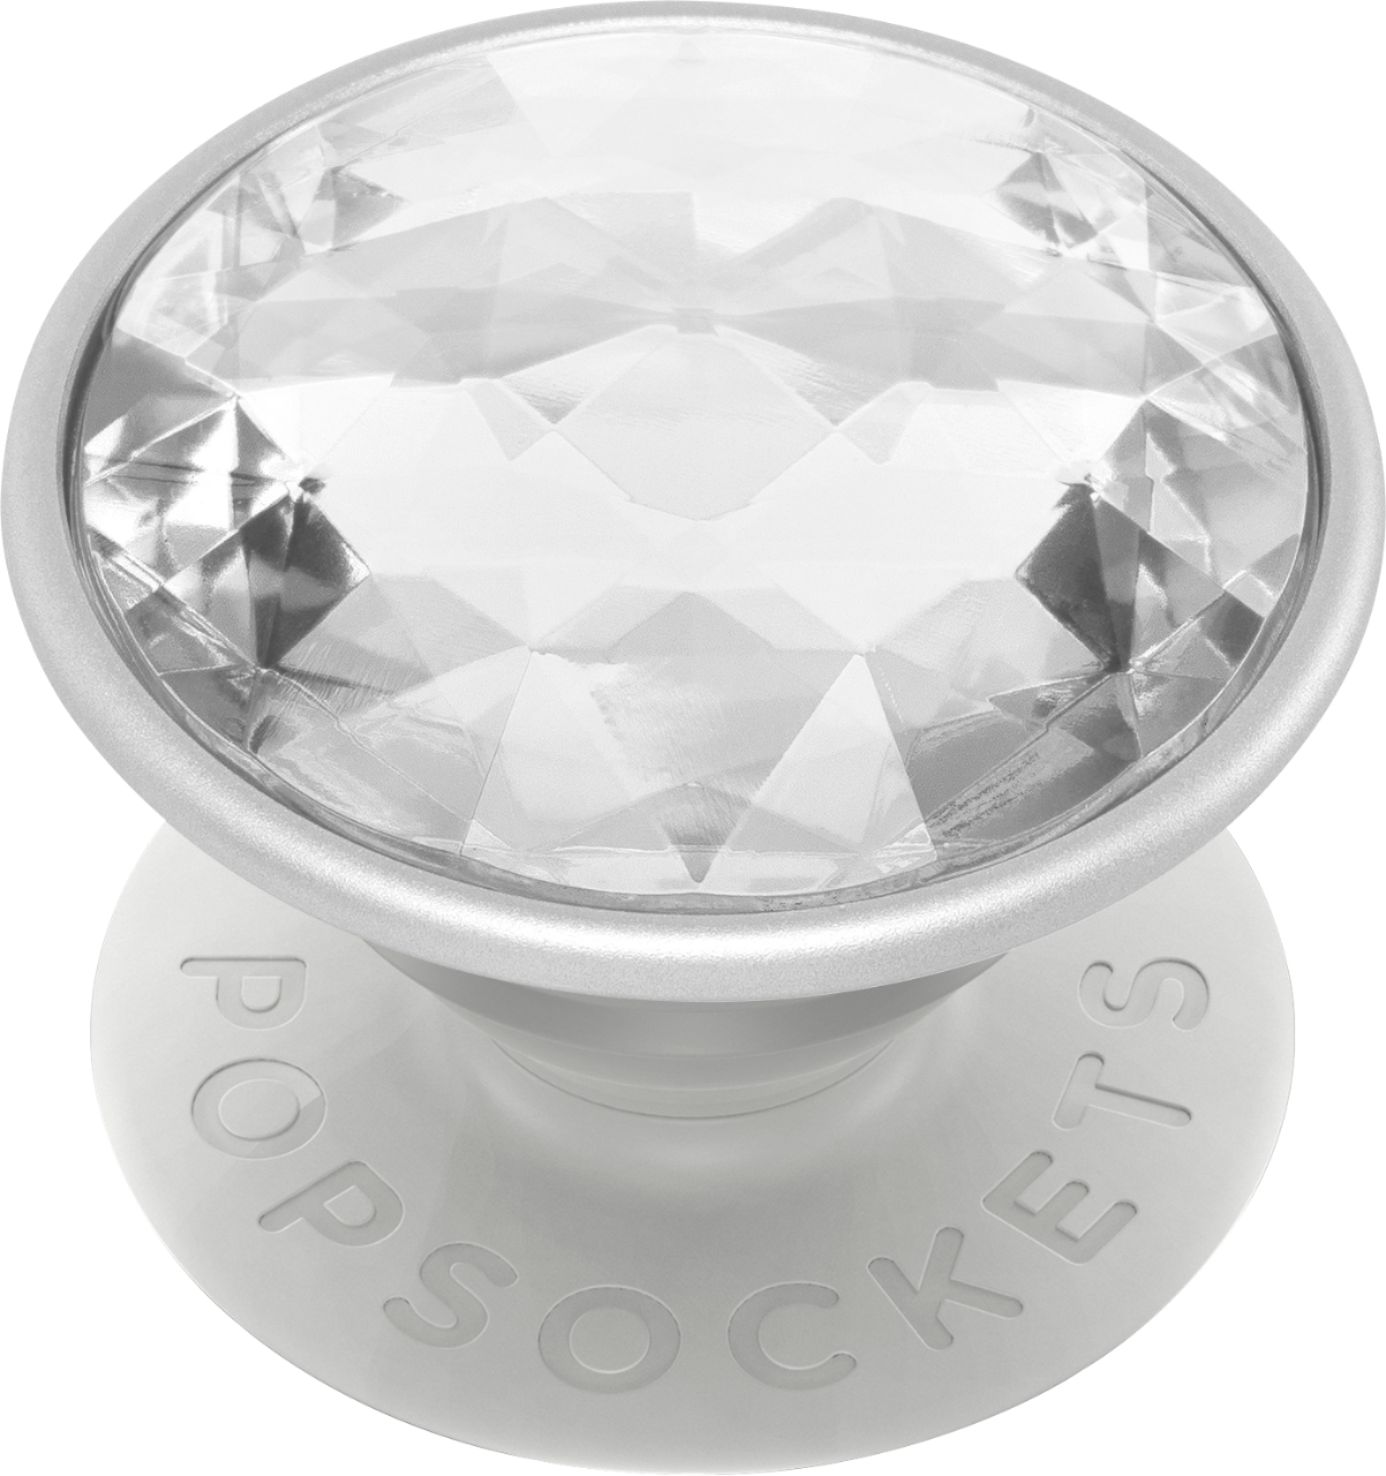 Angle View: PopSockets - PopGrip Premium Cell Phone Grip and Stand - Disco Crystal Silver